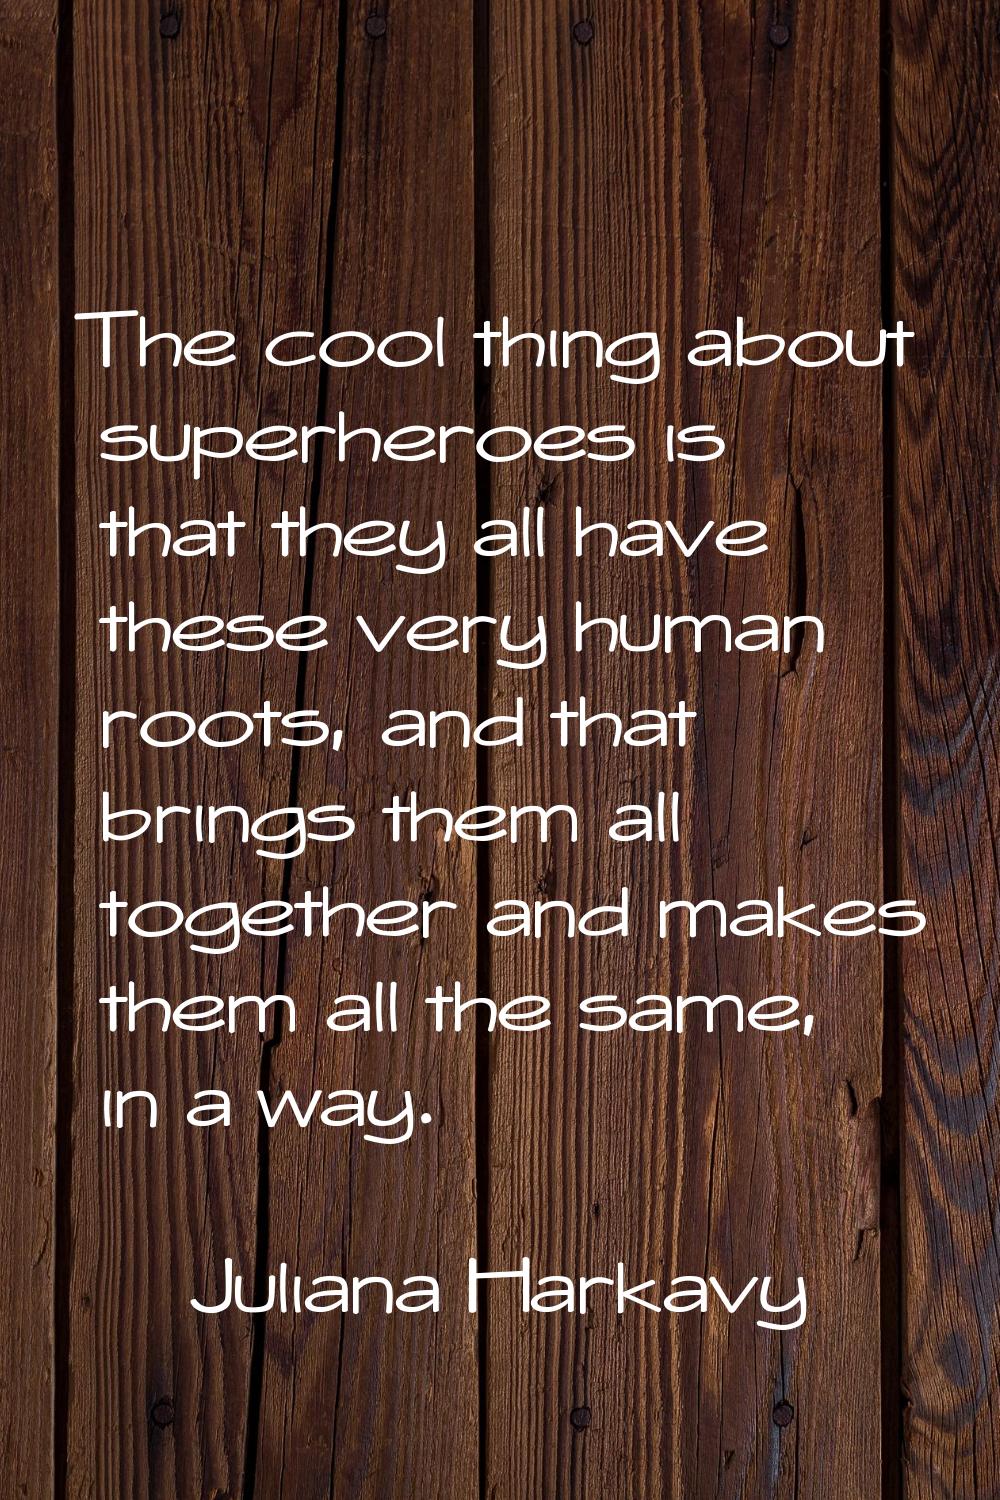 The cool thing about superheroes is that they all have these very human roots, and that brings them